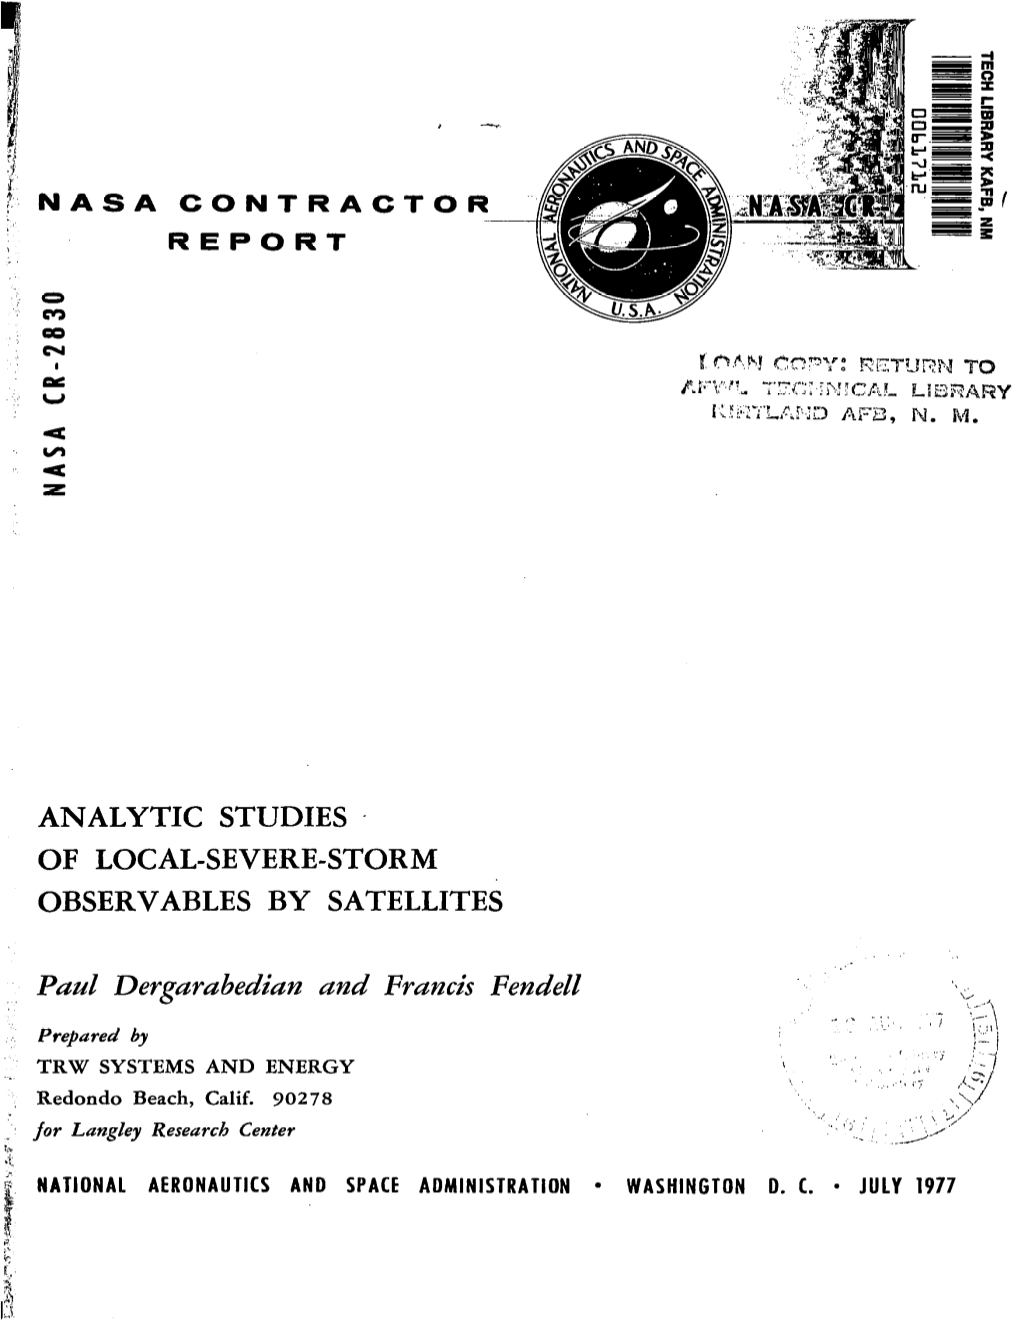 Analytic Studies . of Local-Severe-Storm Observables by Satellites